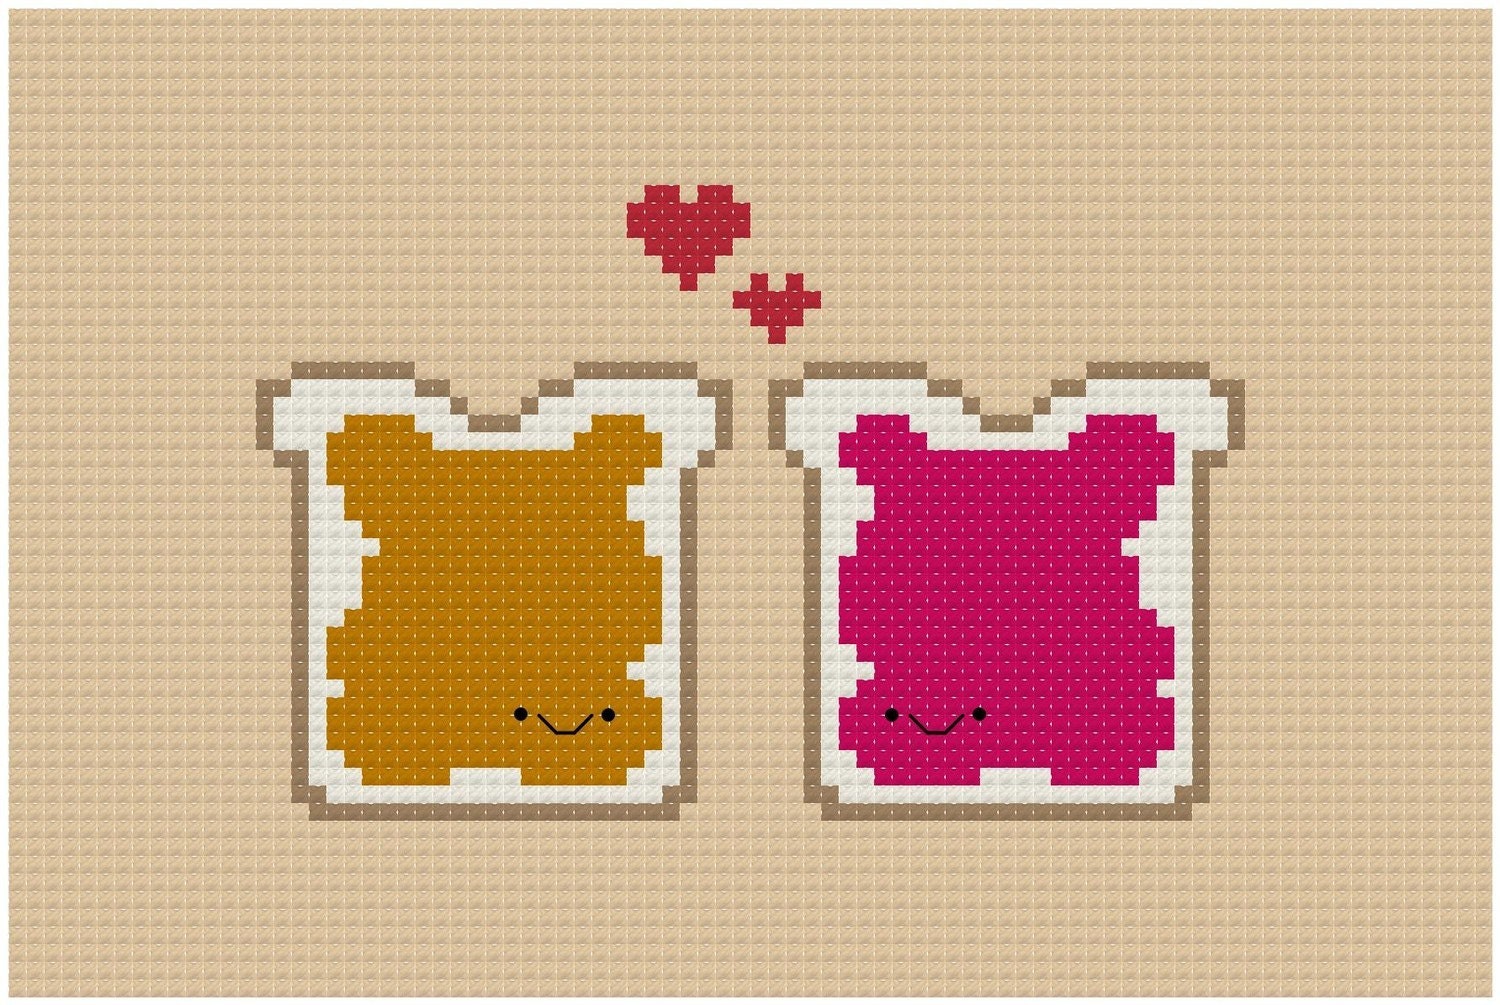 Perfect Pairings - Kawaii Peanut Butter and Jam - PDF Cross stitch Pattern - INSTANT DOWNLOAD